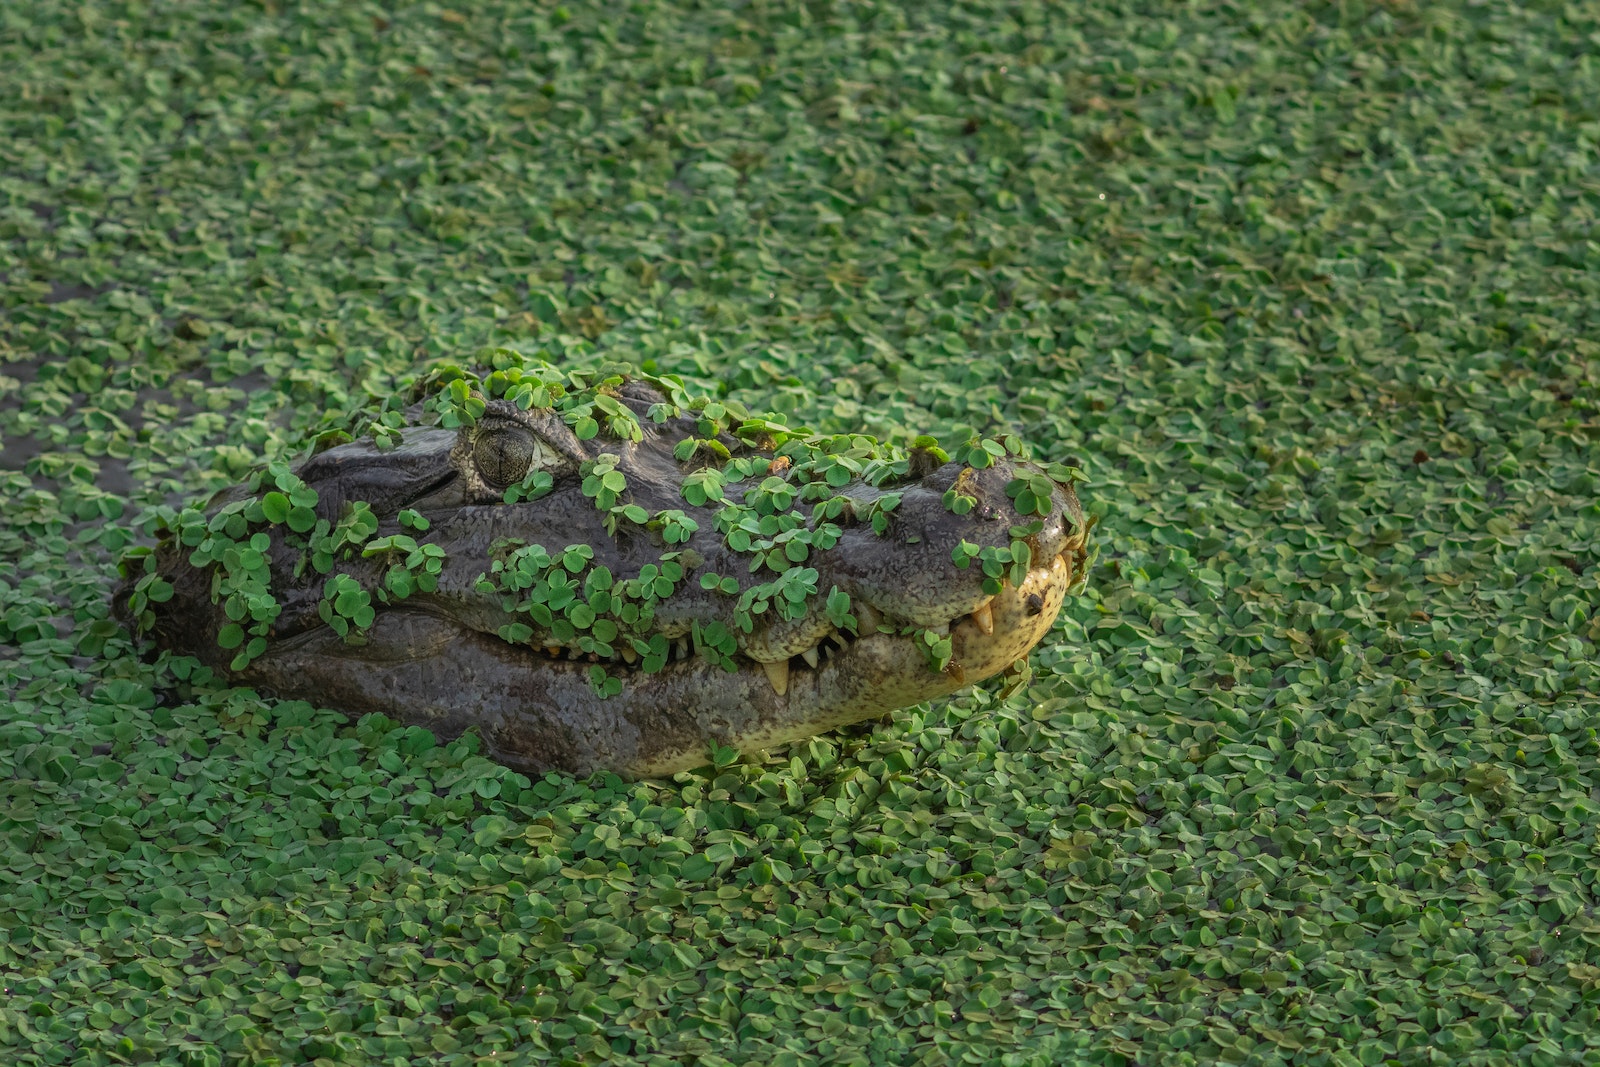 Close-up of an Alligator Head Peeking From Water Surface Covered in Weed